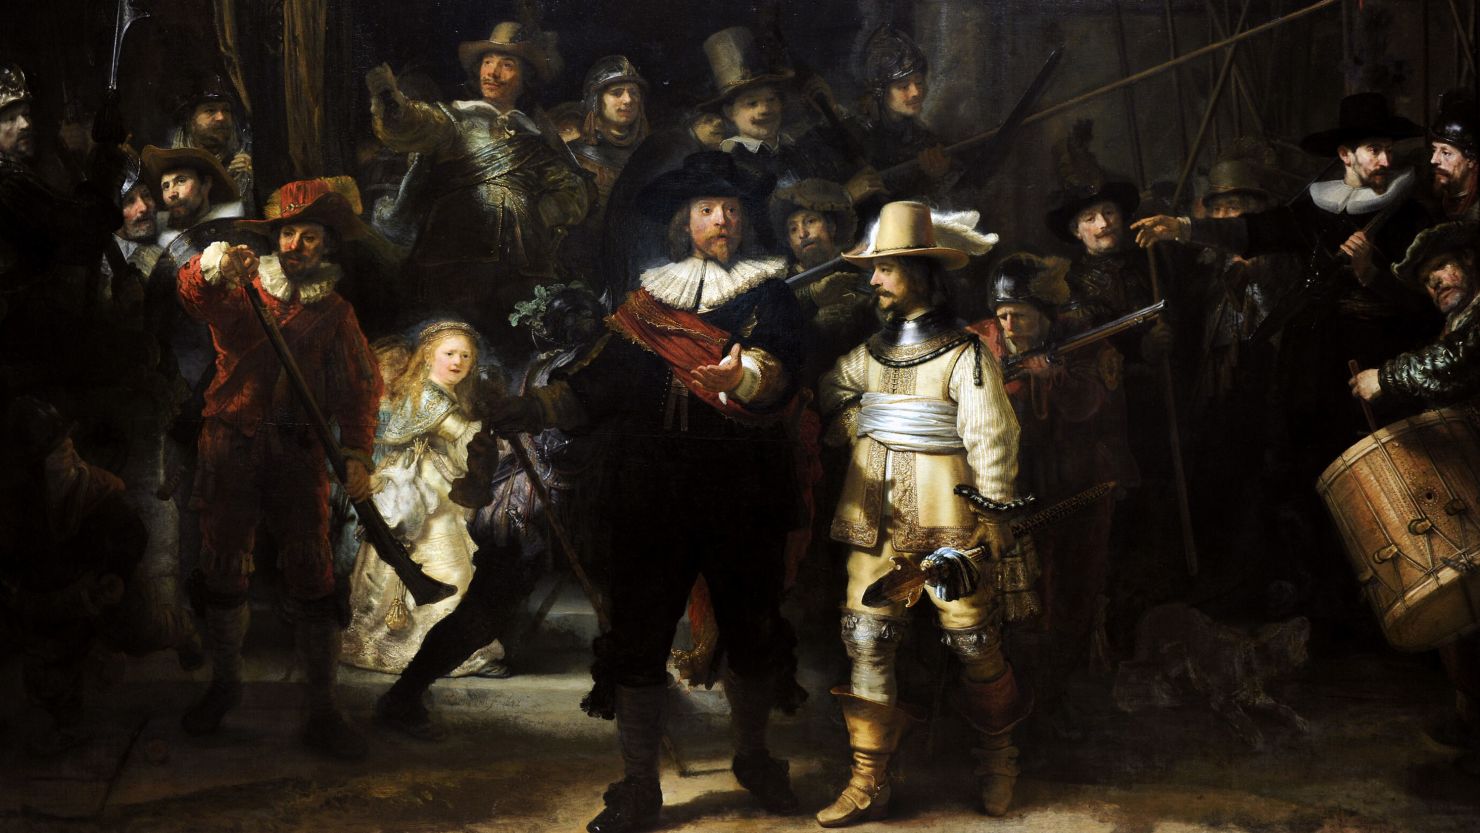 Rembrandt Harmenszoon van Rijn (1606-1669). Dutch painter. The Night Watch, 1662. Rijksmuseum, Amsterdam, Holland. (Photo by: PHAS/Universal Images Group via Getty Images)